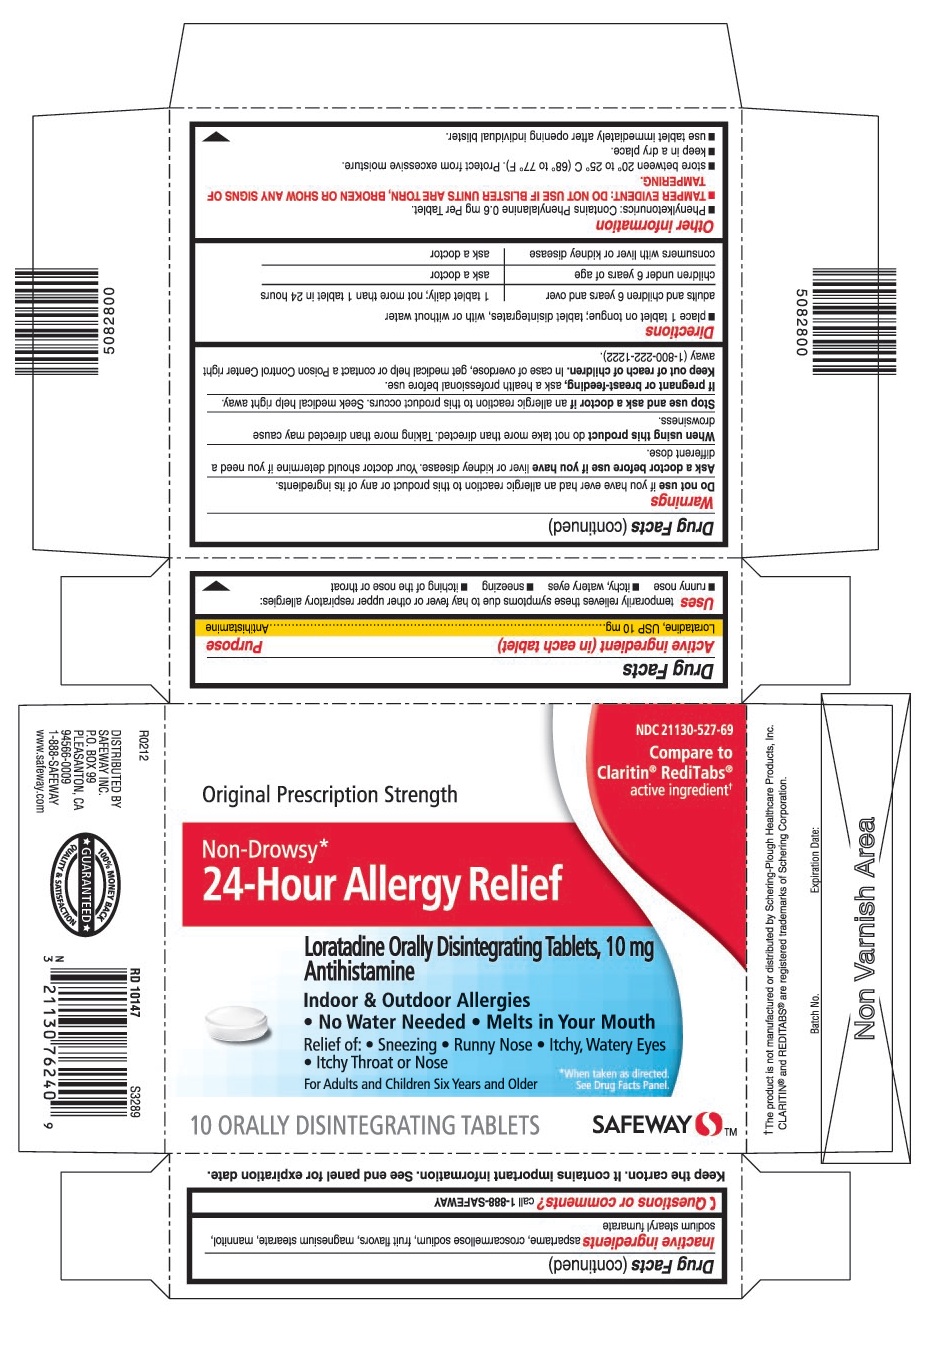 This is the 10 count blister carton label for Safeway Loratadine ODT.